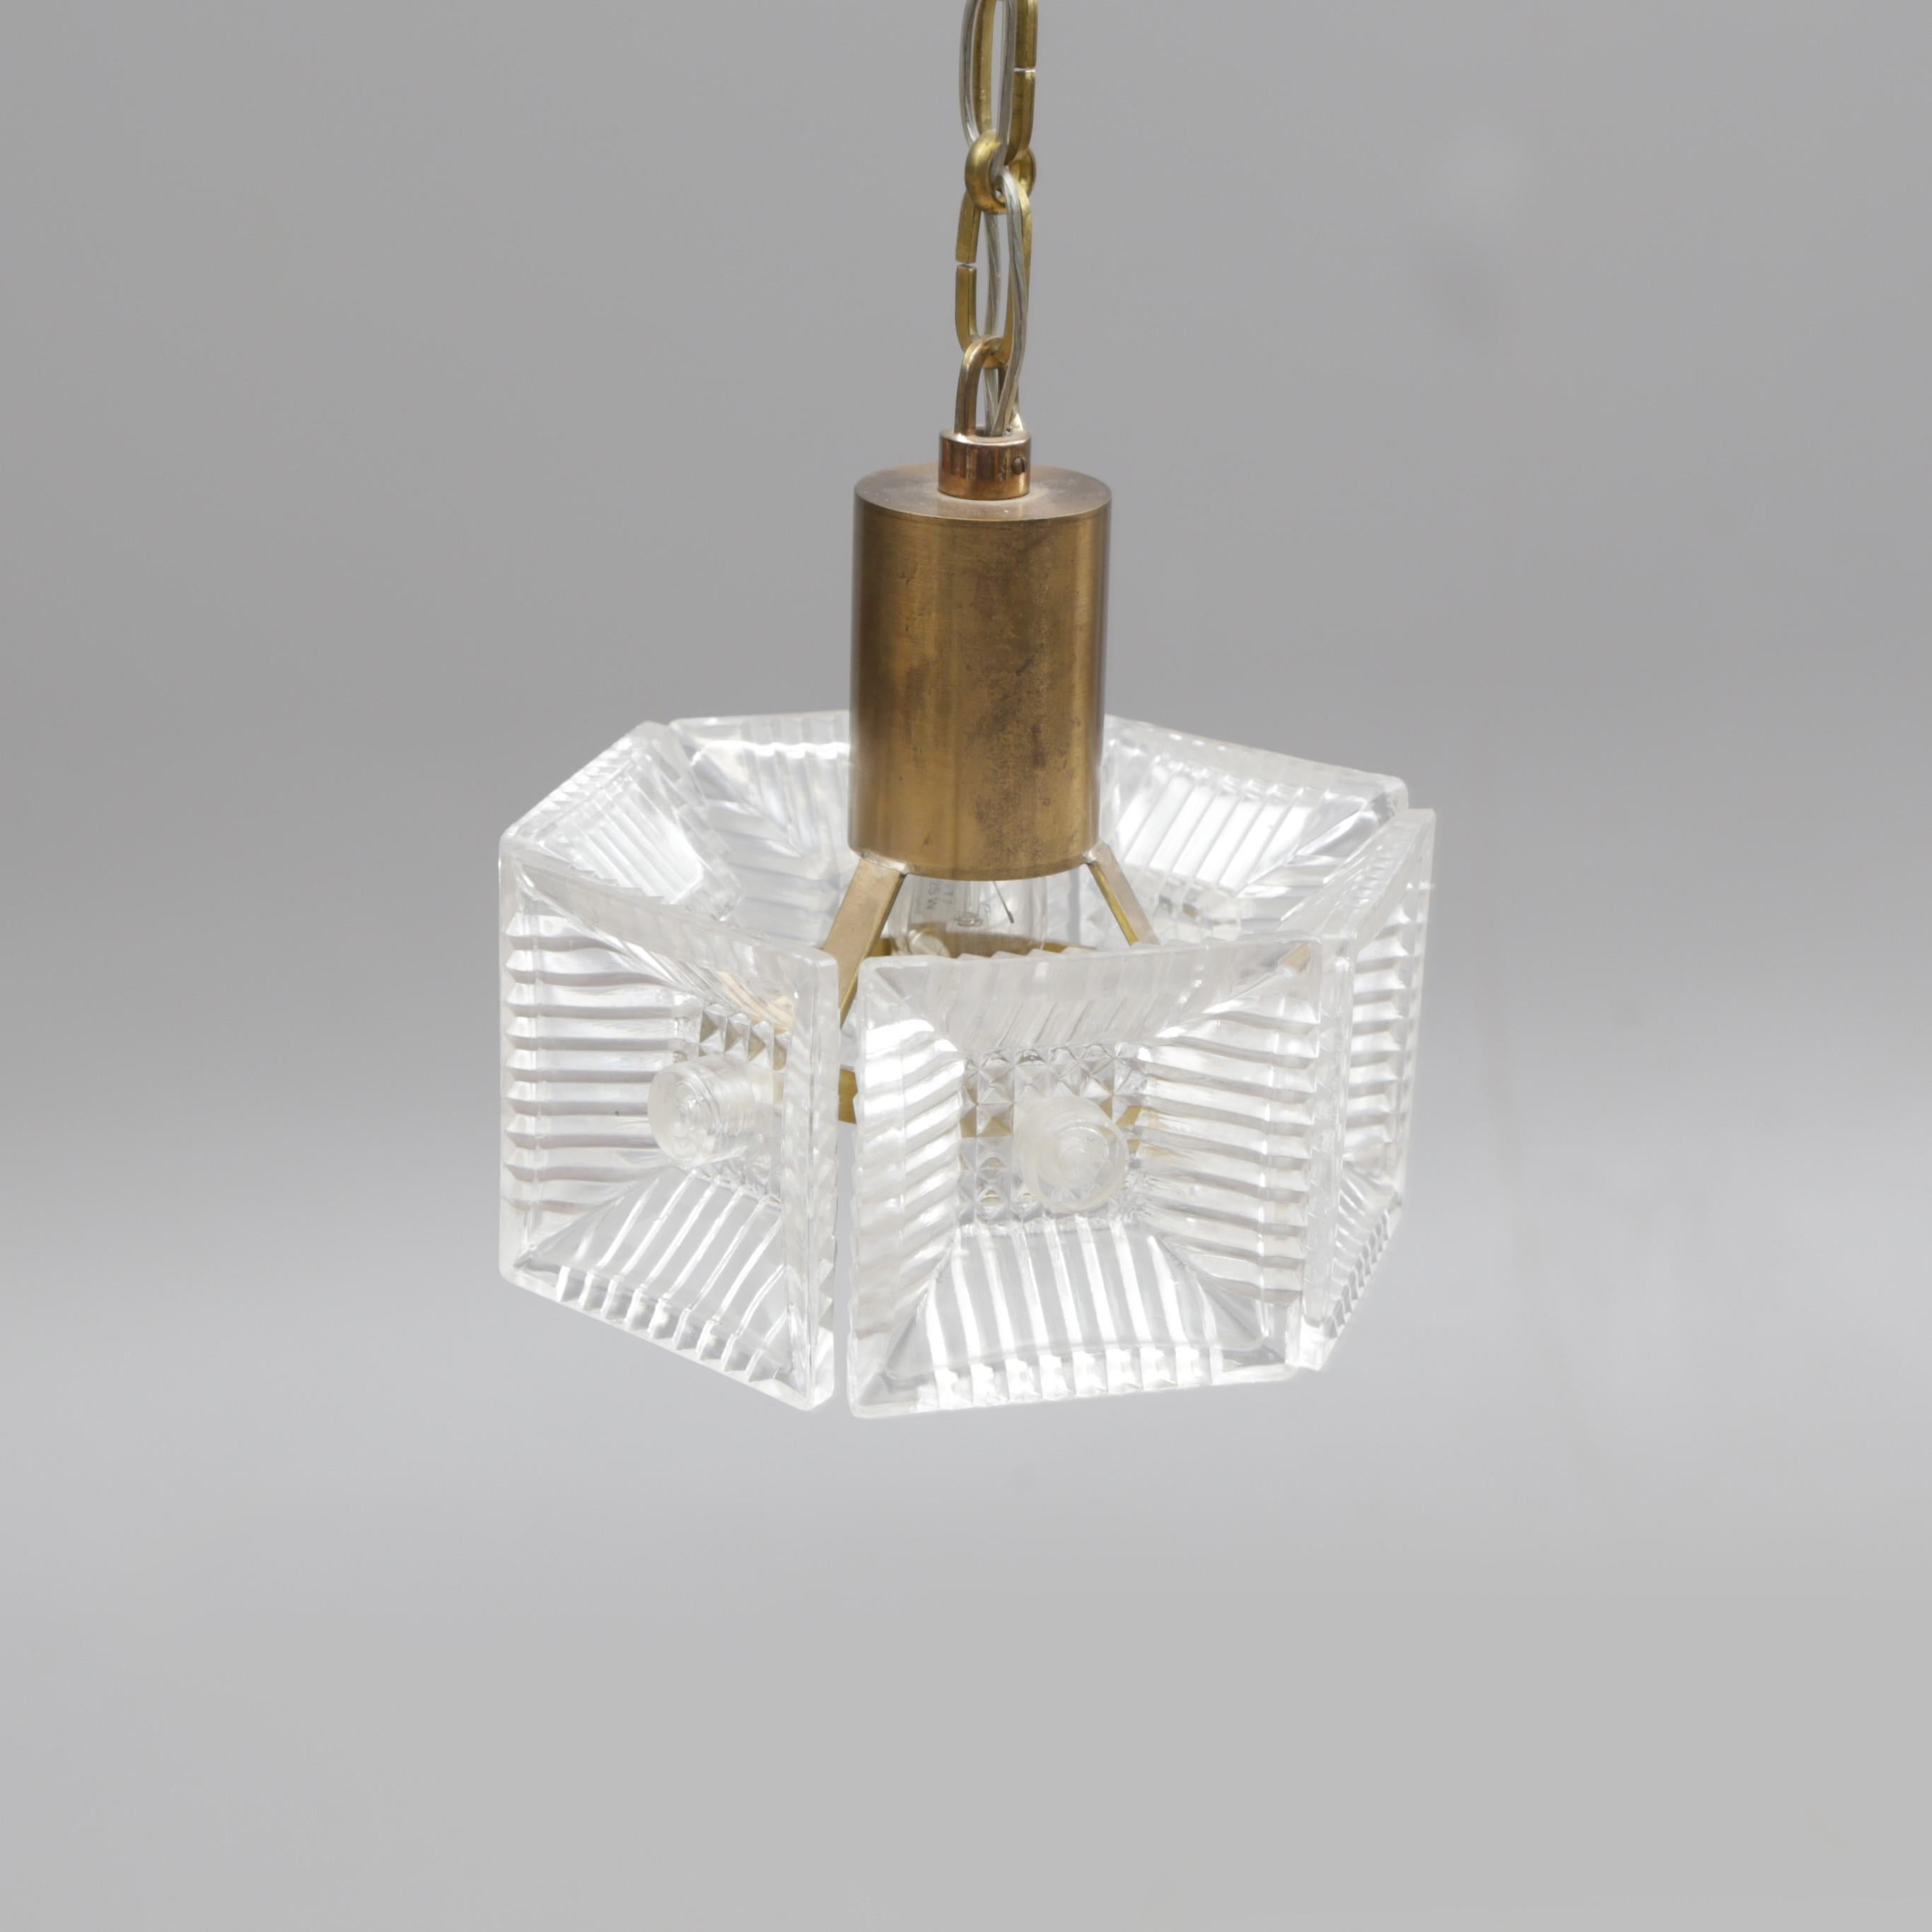 Mid-Century Modern Ceiling Light Carl Fagerlund for Orrefors Brass and cast glass Sweden 1960 For Sale